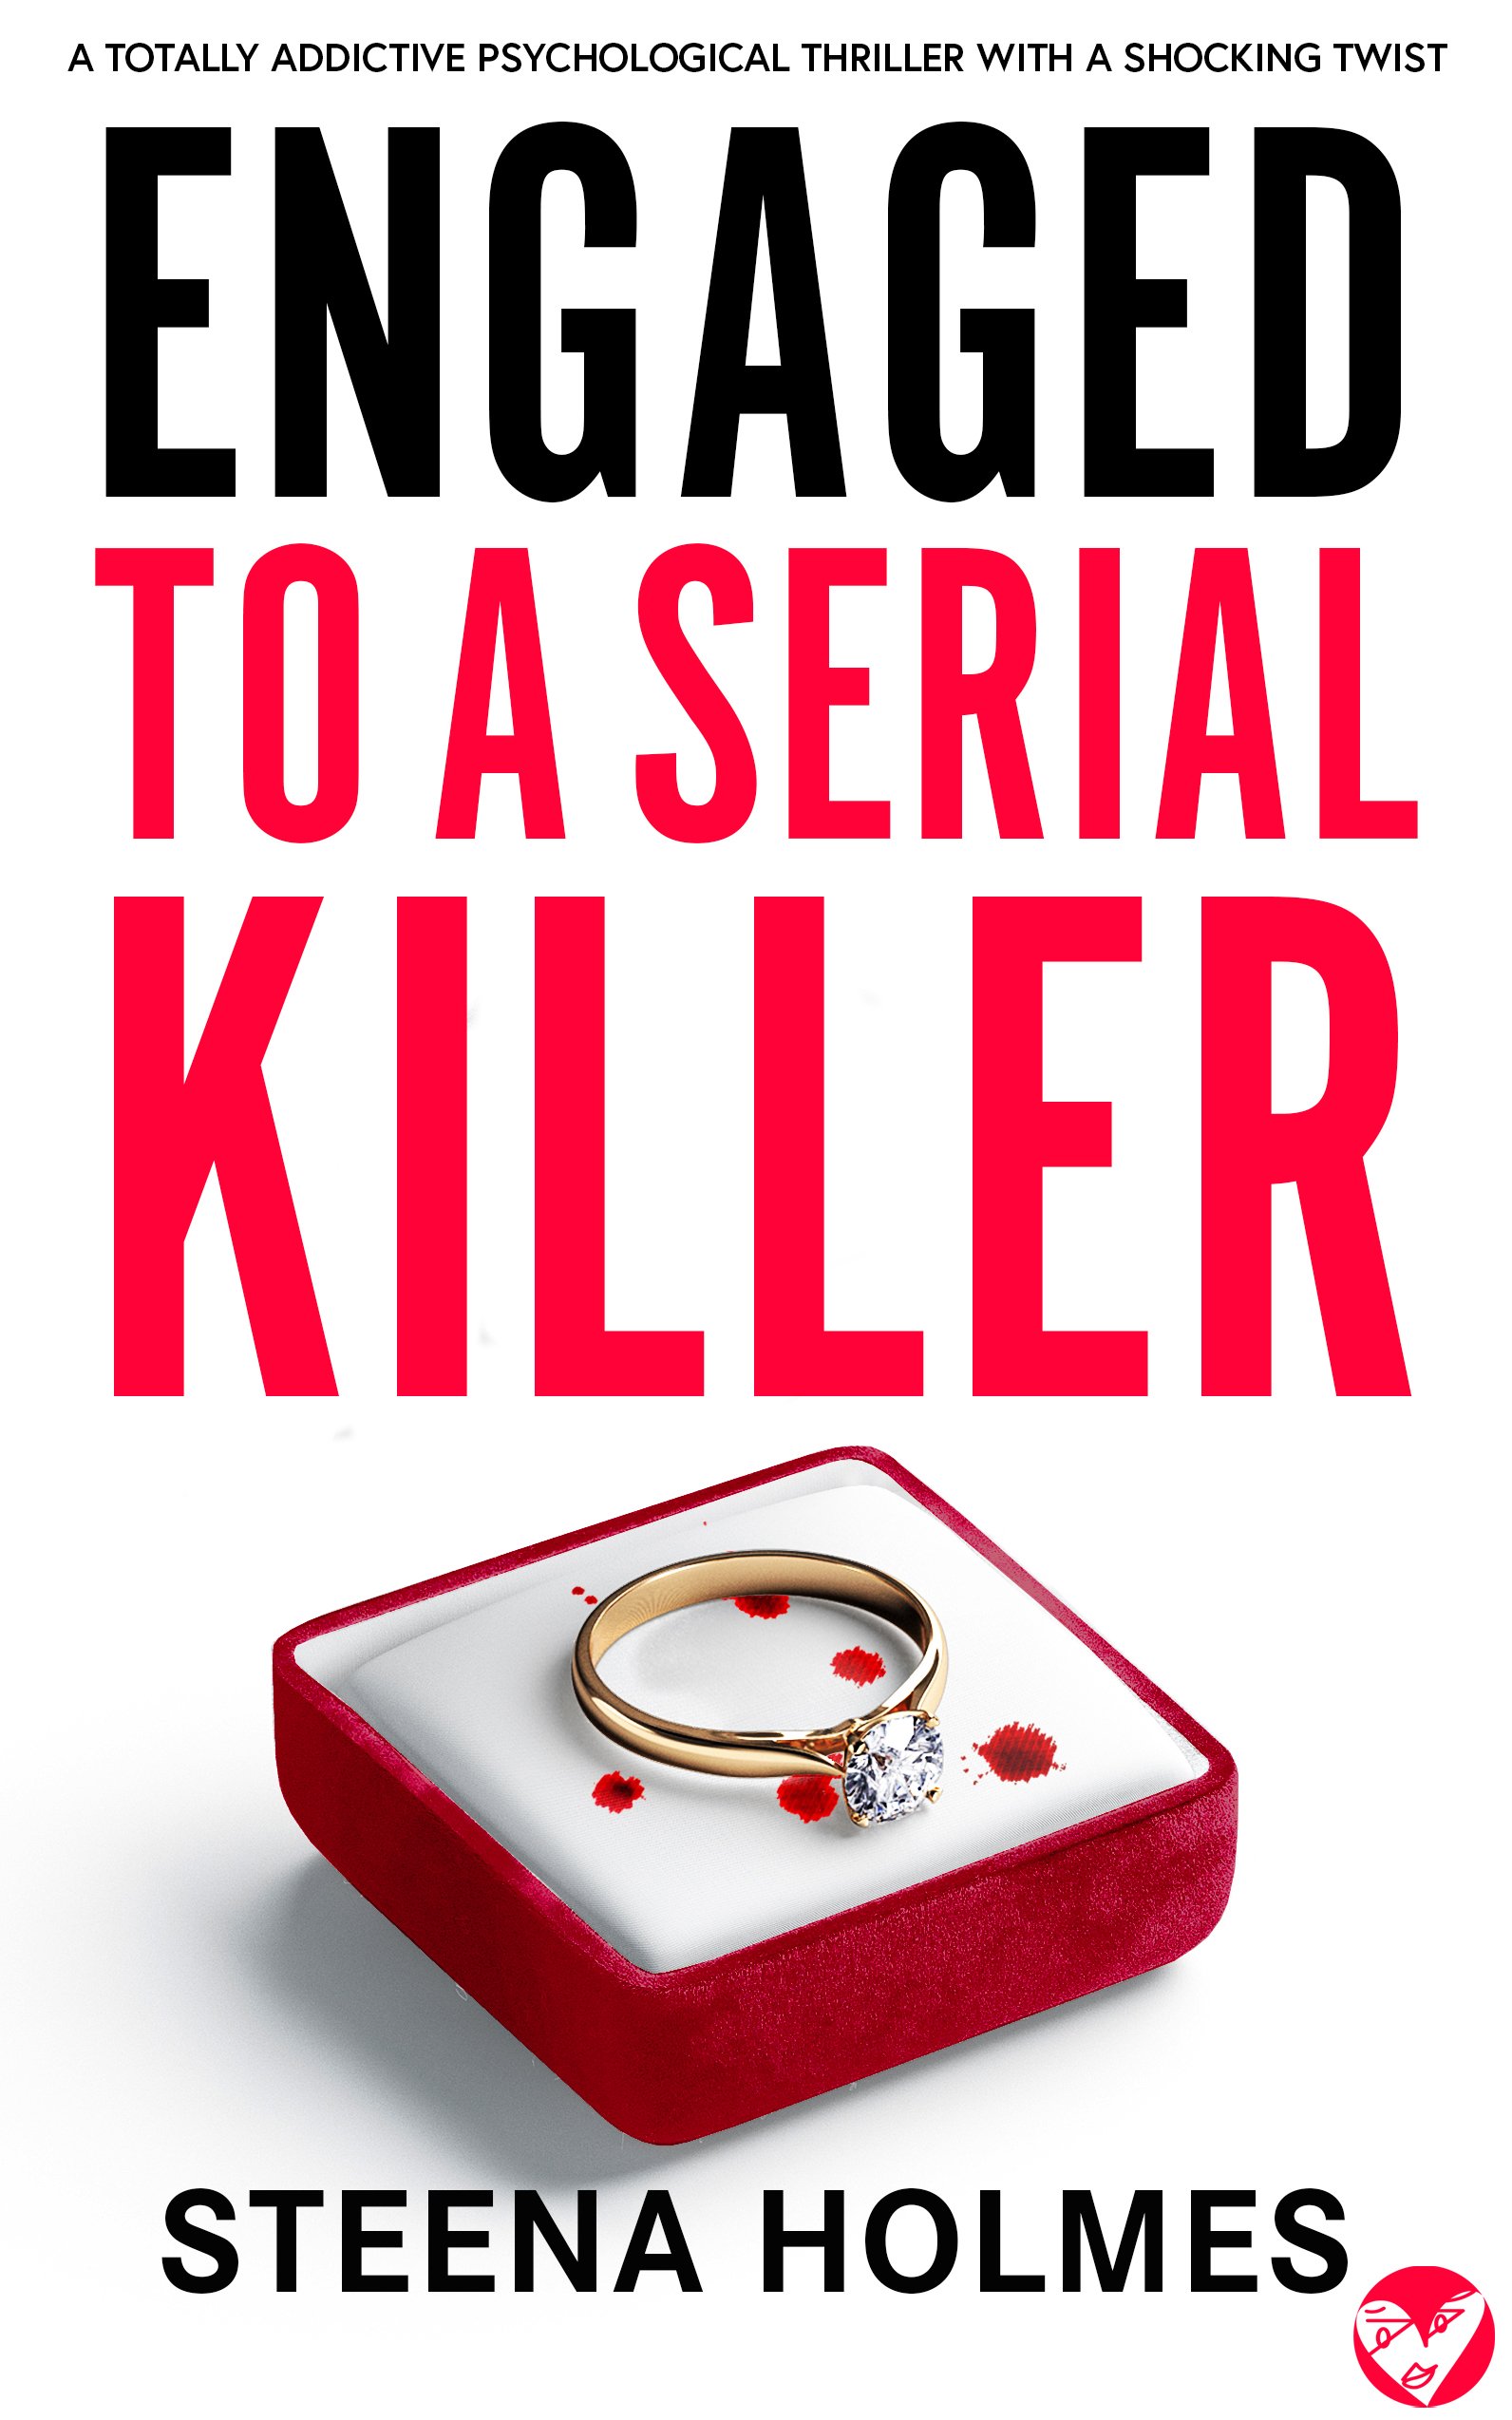 ENGAGED TO A SERIAL KILLER Cover publish.jpg